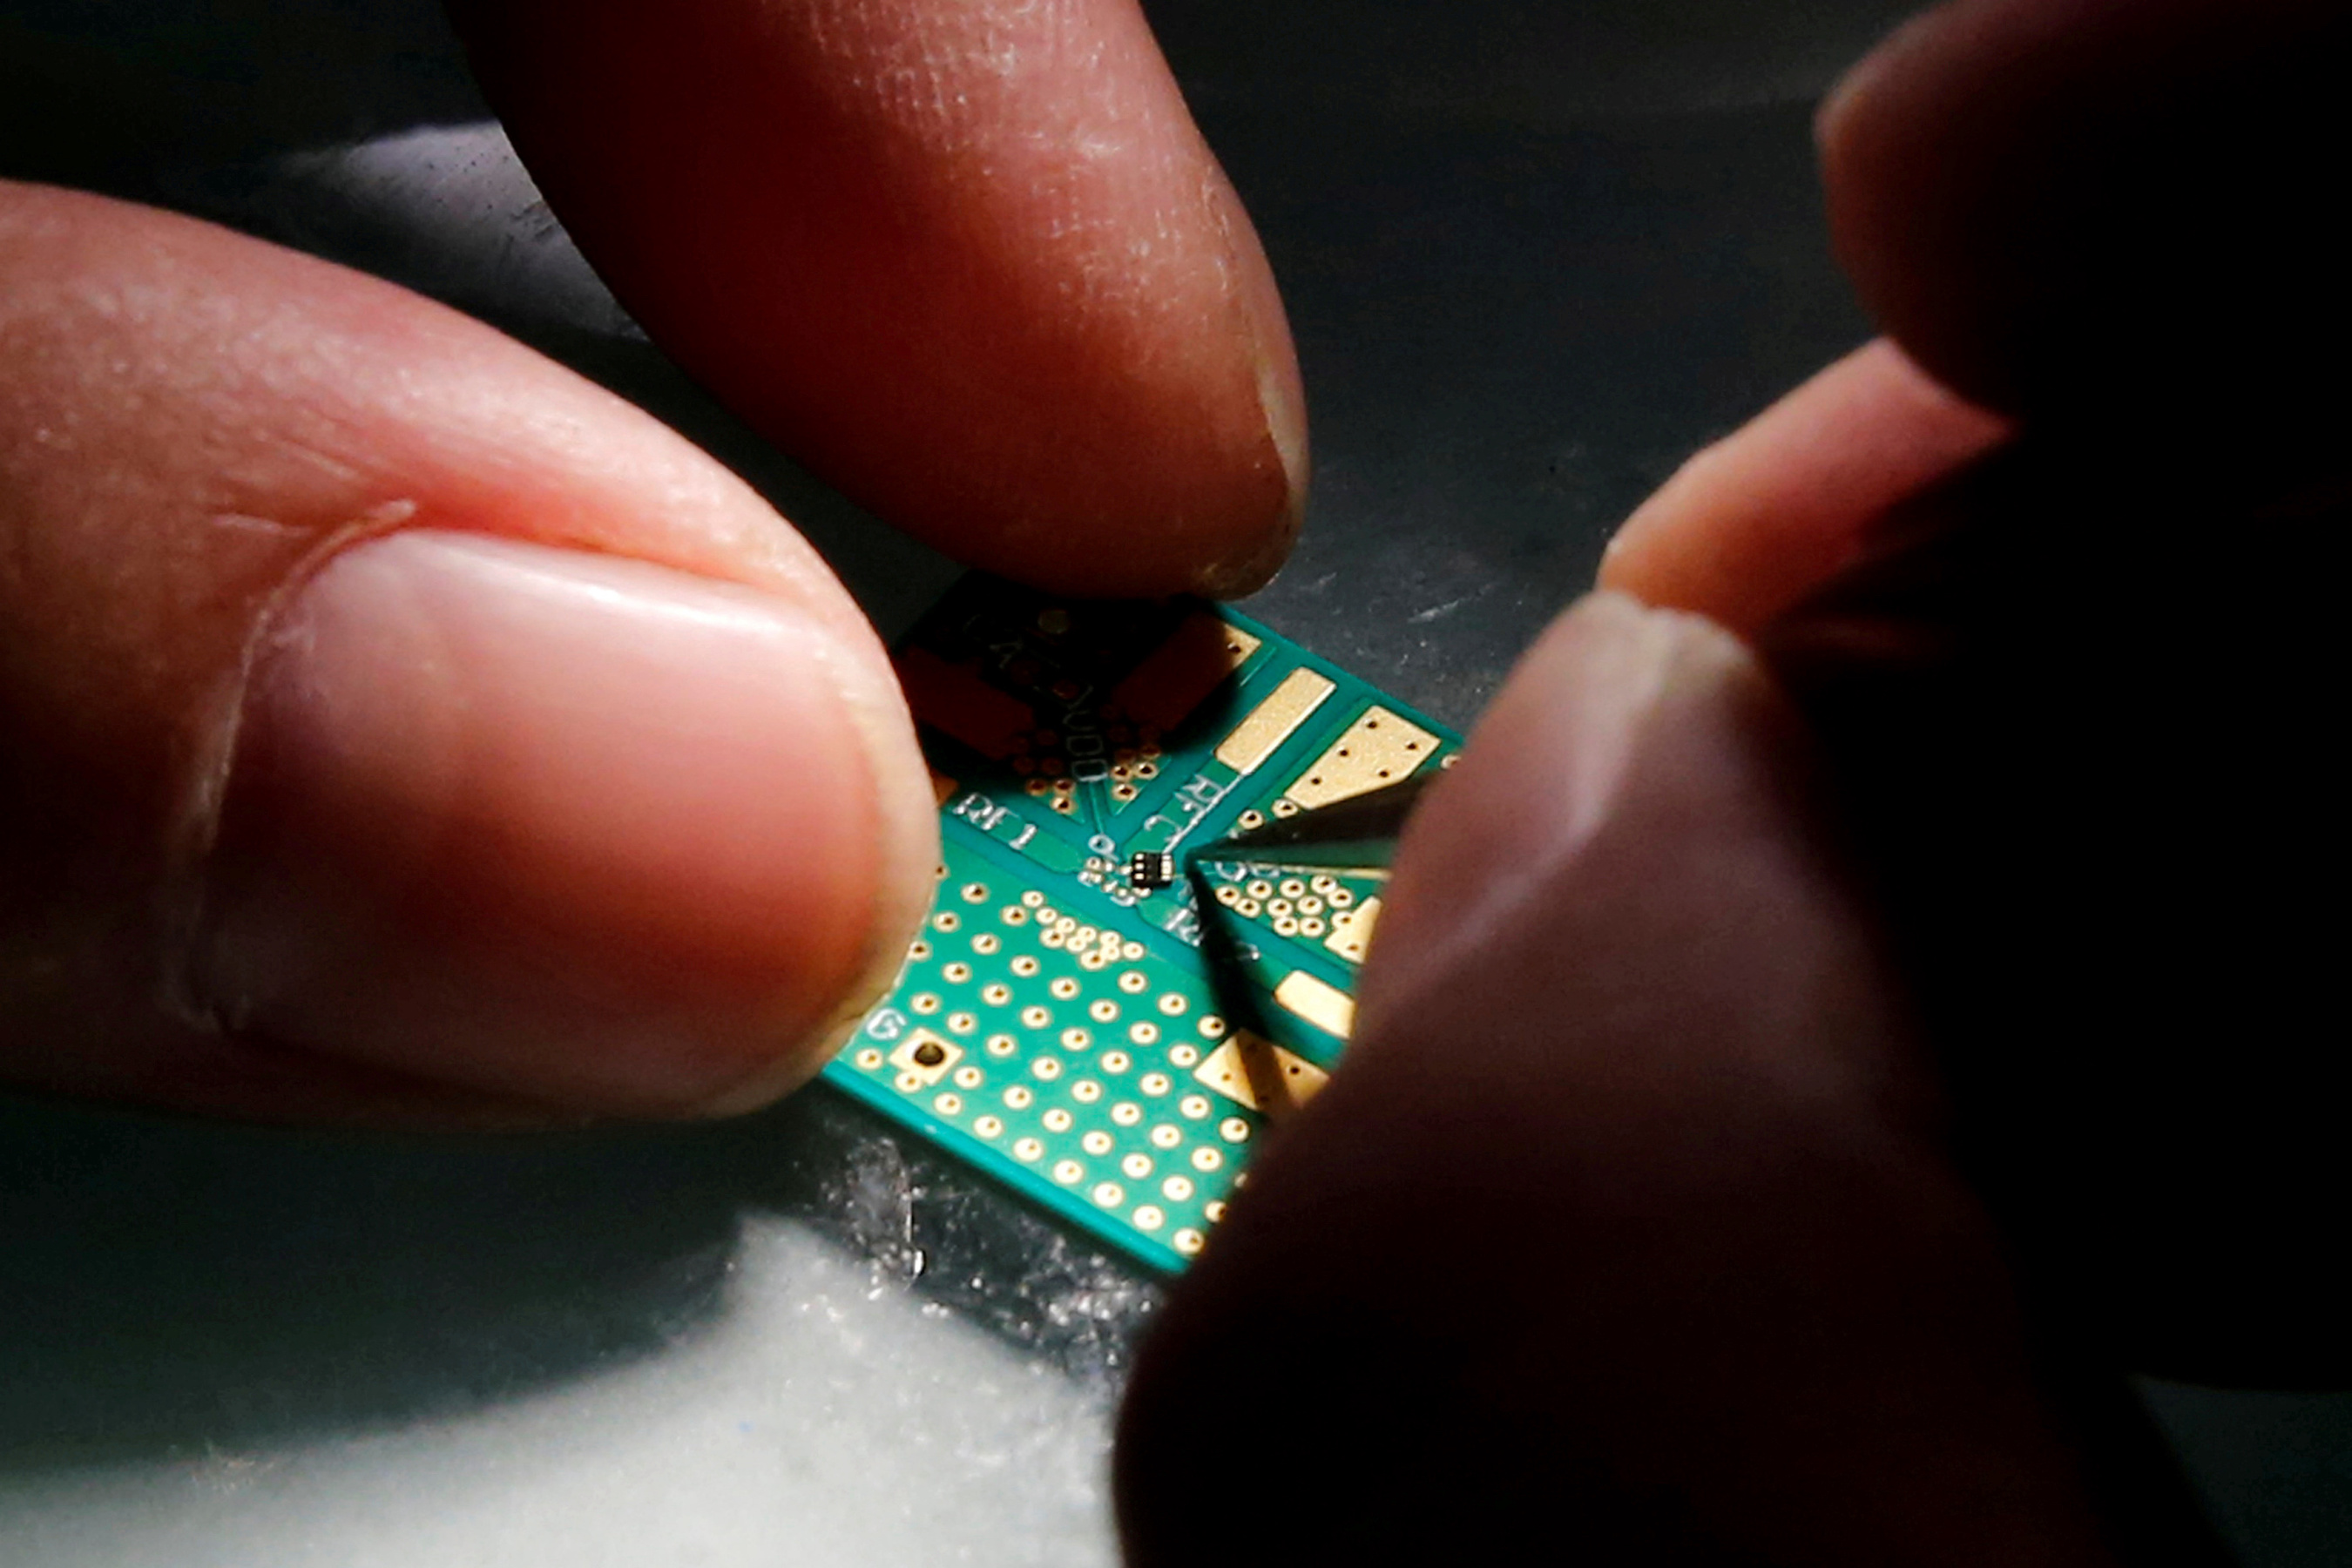 FILE PHOTO: A researcher plants a semiconductor on an interface board during a research work to design and develop a semiconductor product at Tsinghua Unigroup research centre in Beijing, China, February 29, 2016.  REUTERS/Kim Kyung-Hoon/File Photo